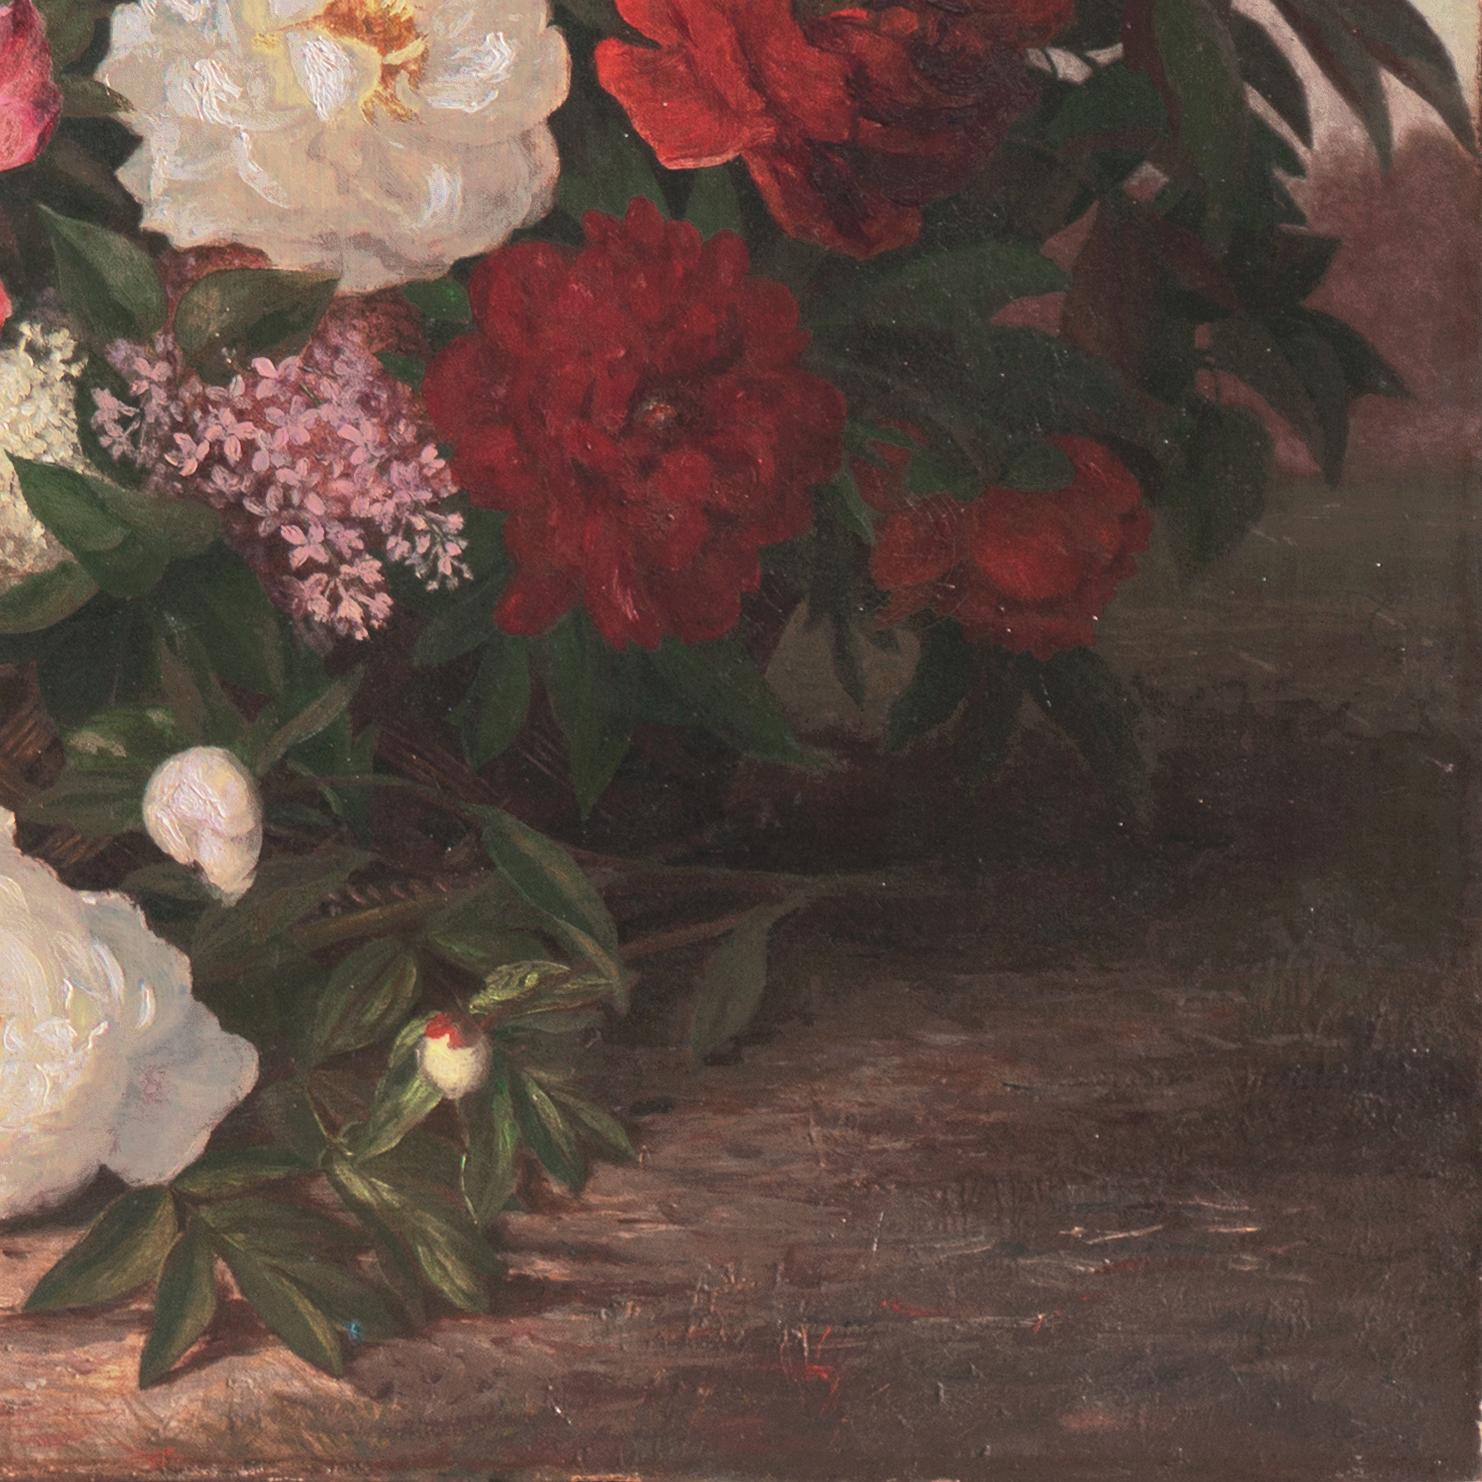 'Basket of Flowers', Large, 19th century, American School, Oil Still Life, Roses - Painting by American School, 19th Century